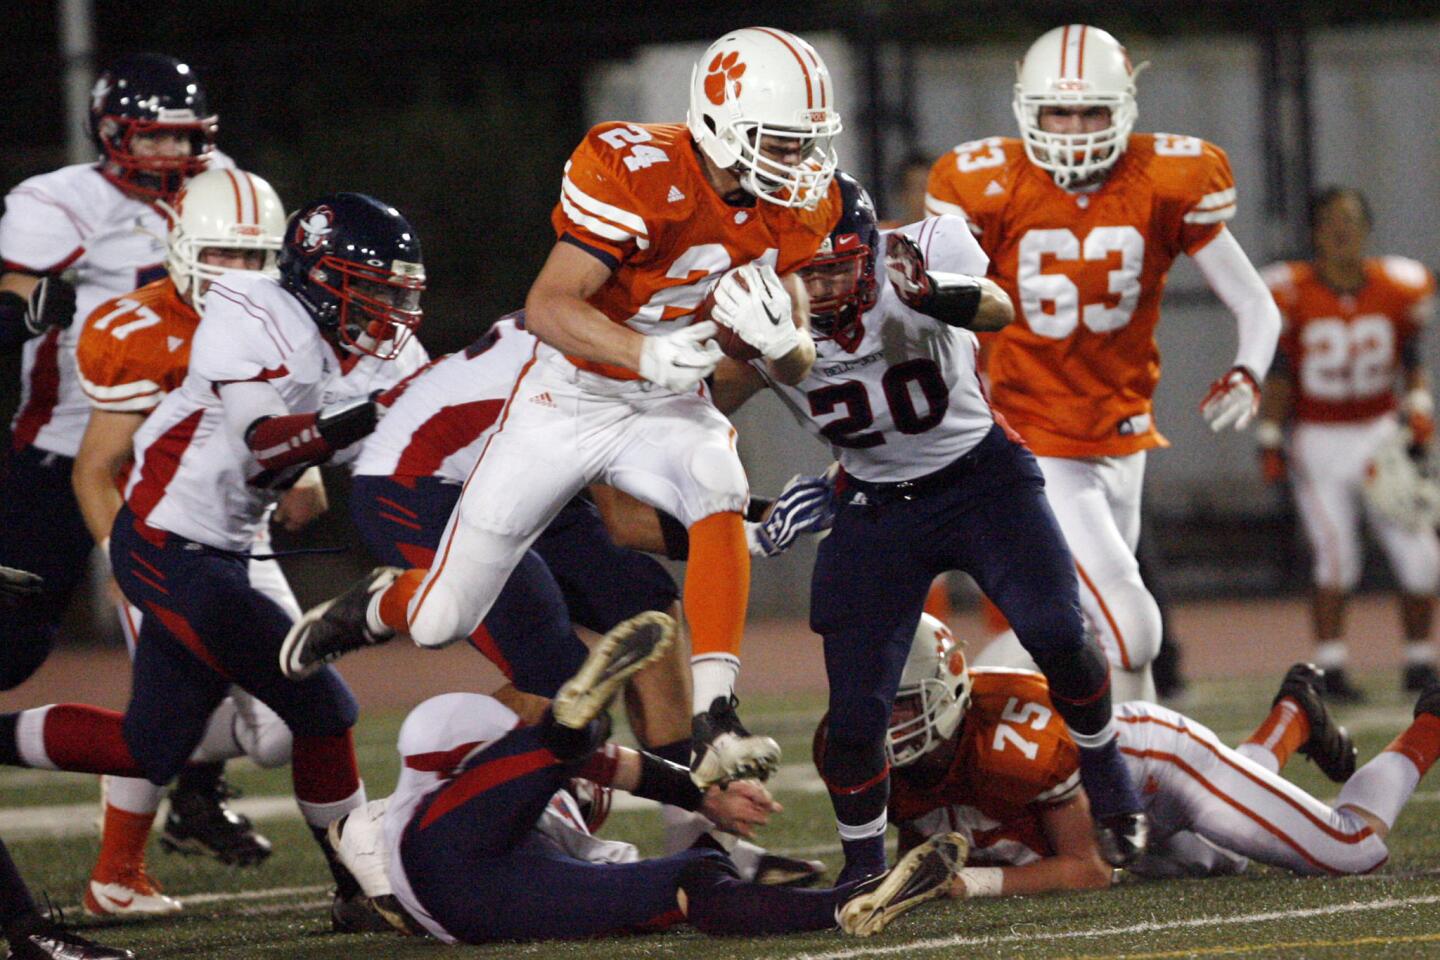 Pasadena Poly's Jake Zelek, center, runs with the ball during a game against Bell-Jeff at South Pasadena High School on Friday, September 28, 2012.